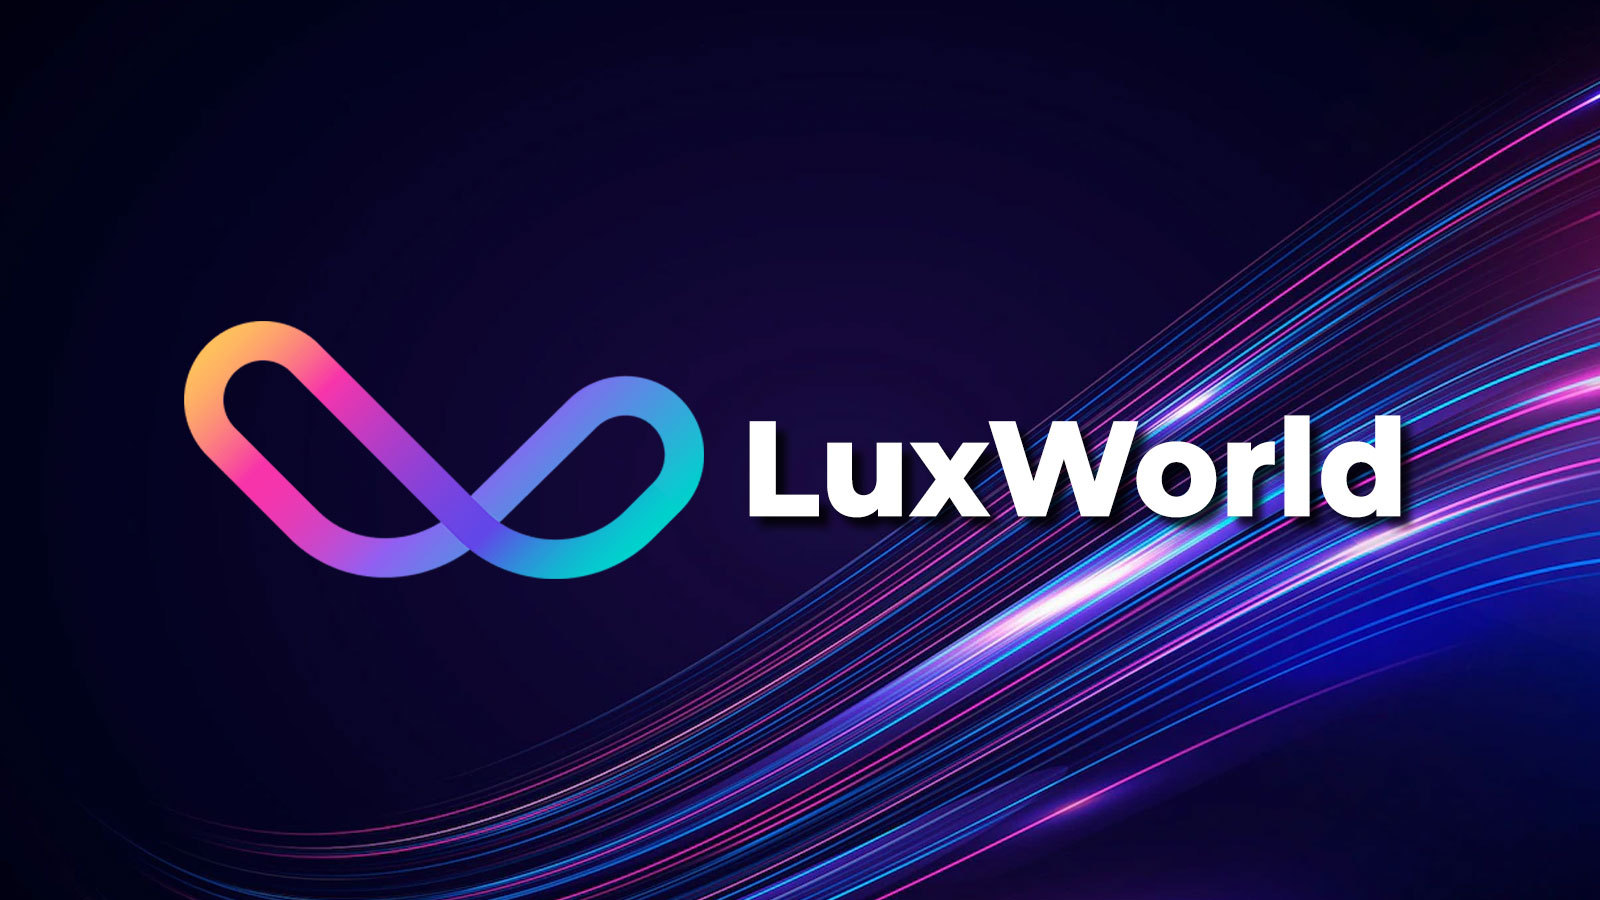 LuxWorld - The Whole “Travel to Earn” Ecosystem in Web3